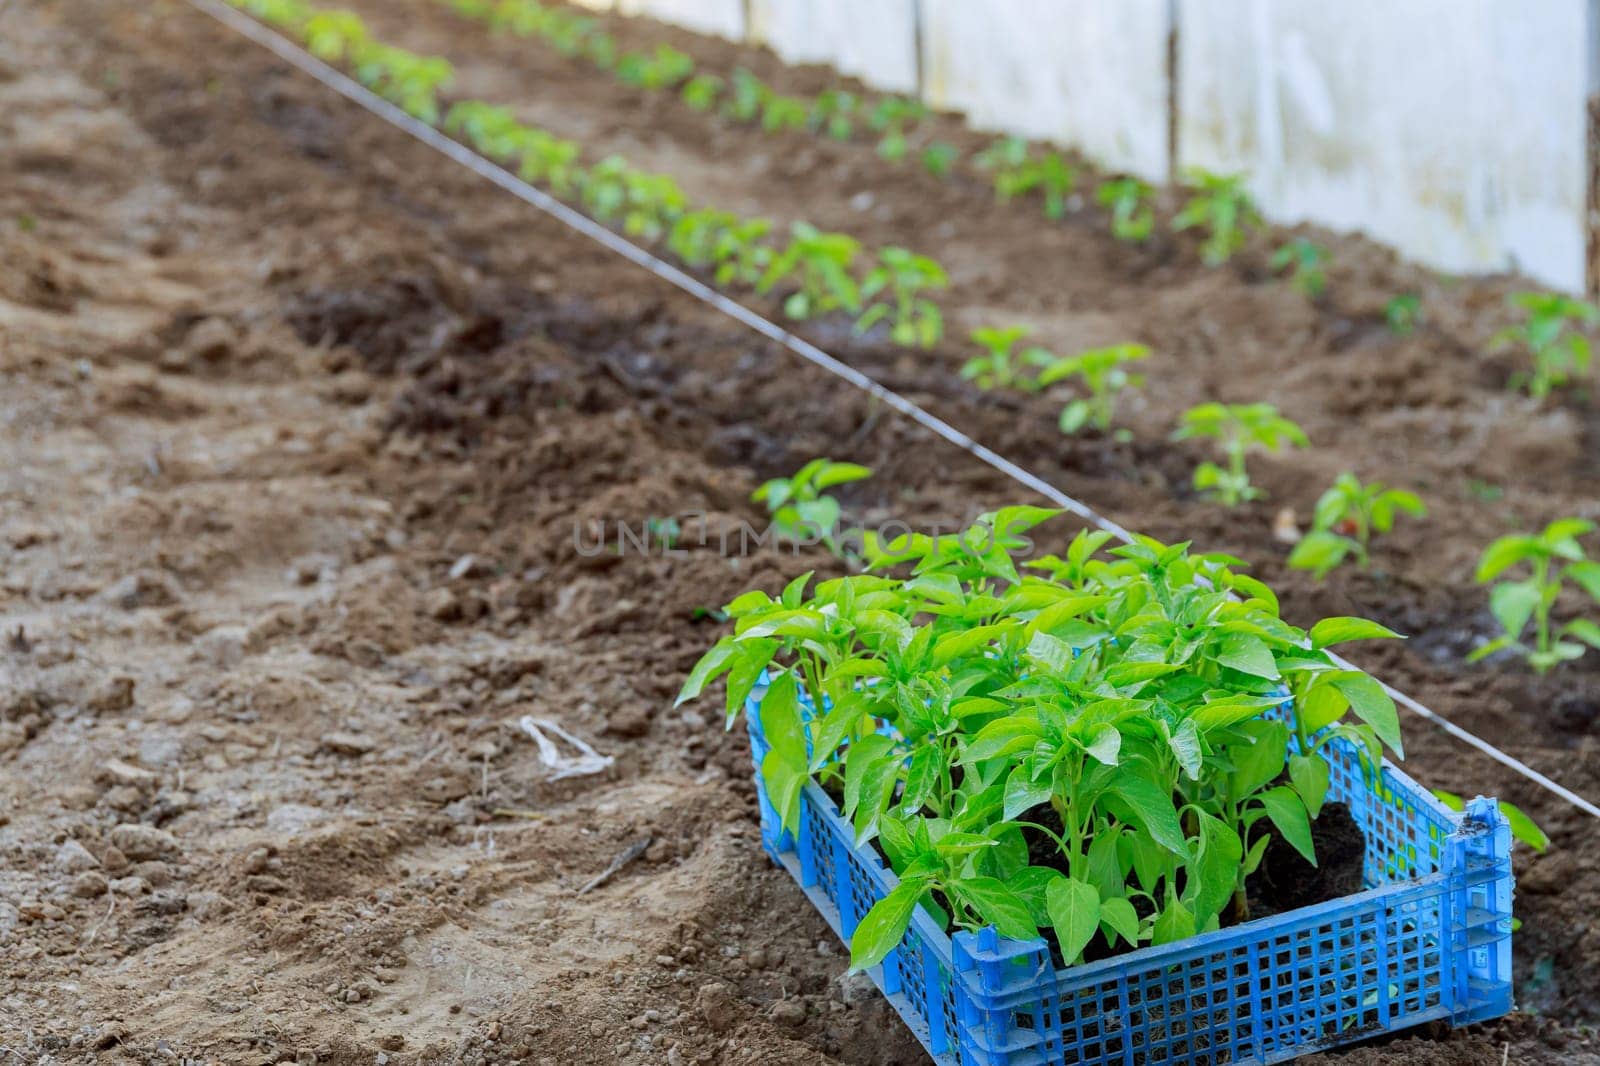 Pepper is planted in a greenhouse or in the field in fertile soil. Planting pepper seedlings requires careful preparation of soil.